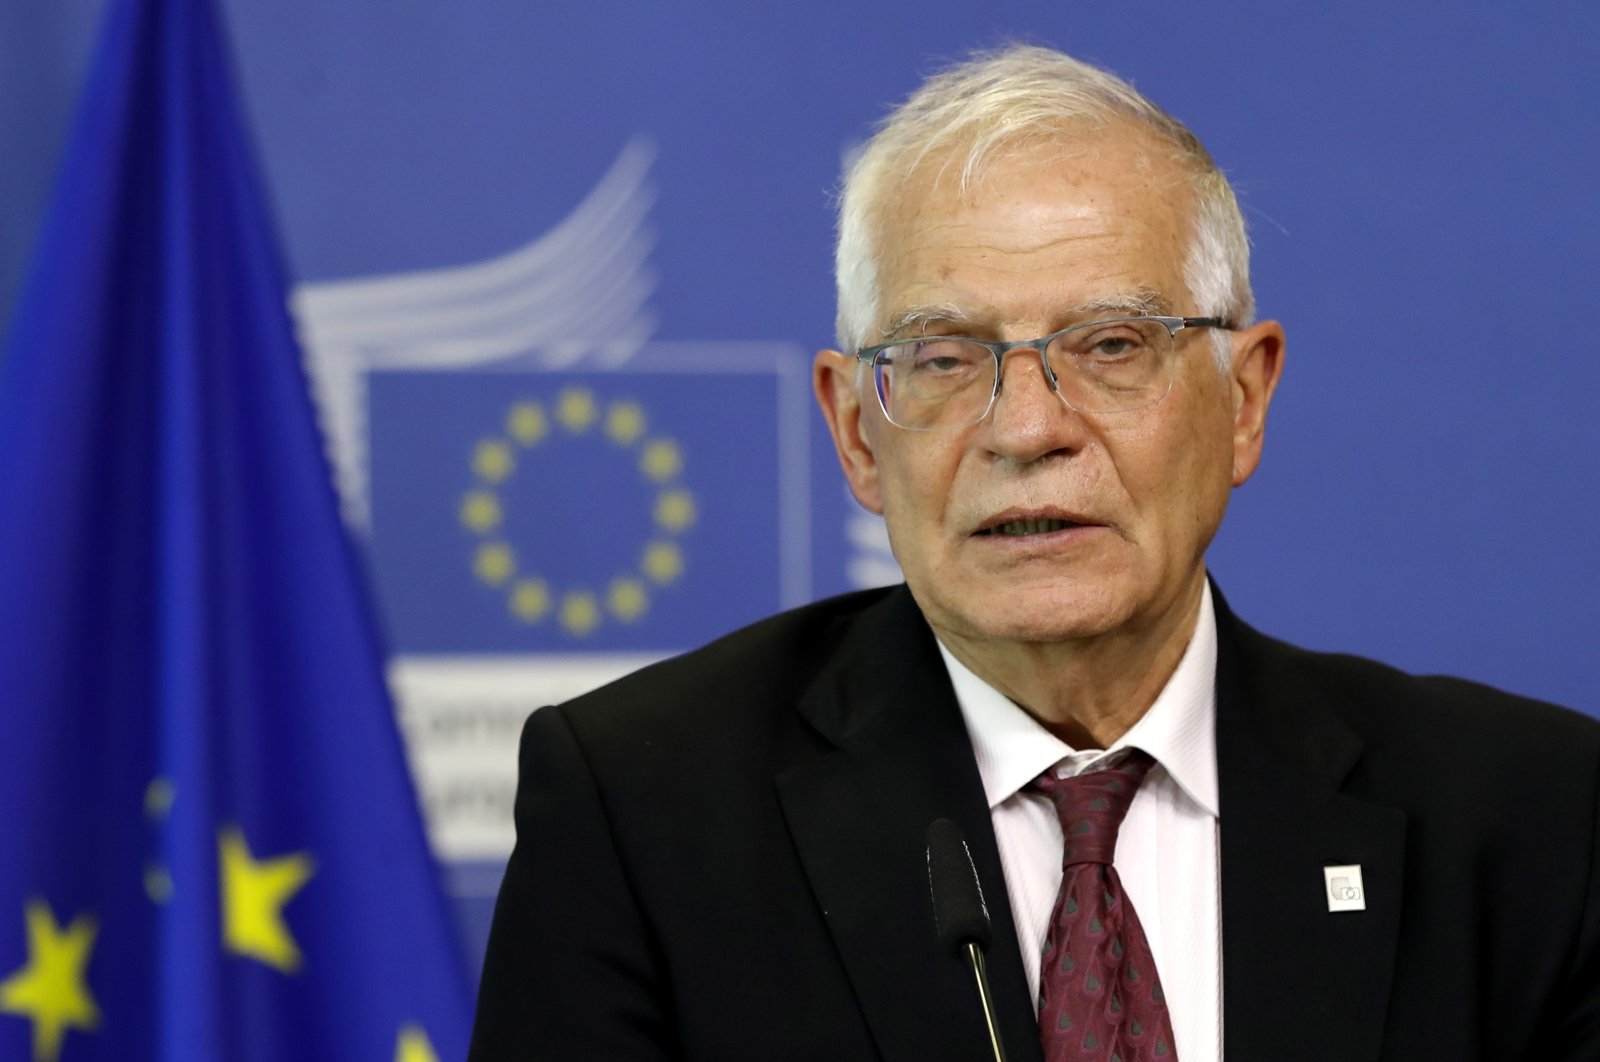 European Union High Representative for Foreign Affairs and Security Policy Josep Borrell addresses the press at the start of the annual spring meeting of the international donor group for Palestine (AHLC) in Brussels, Belgium, May 10, 2022. (EPA Photo)